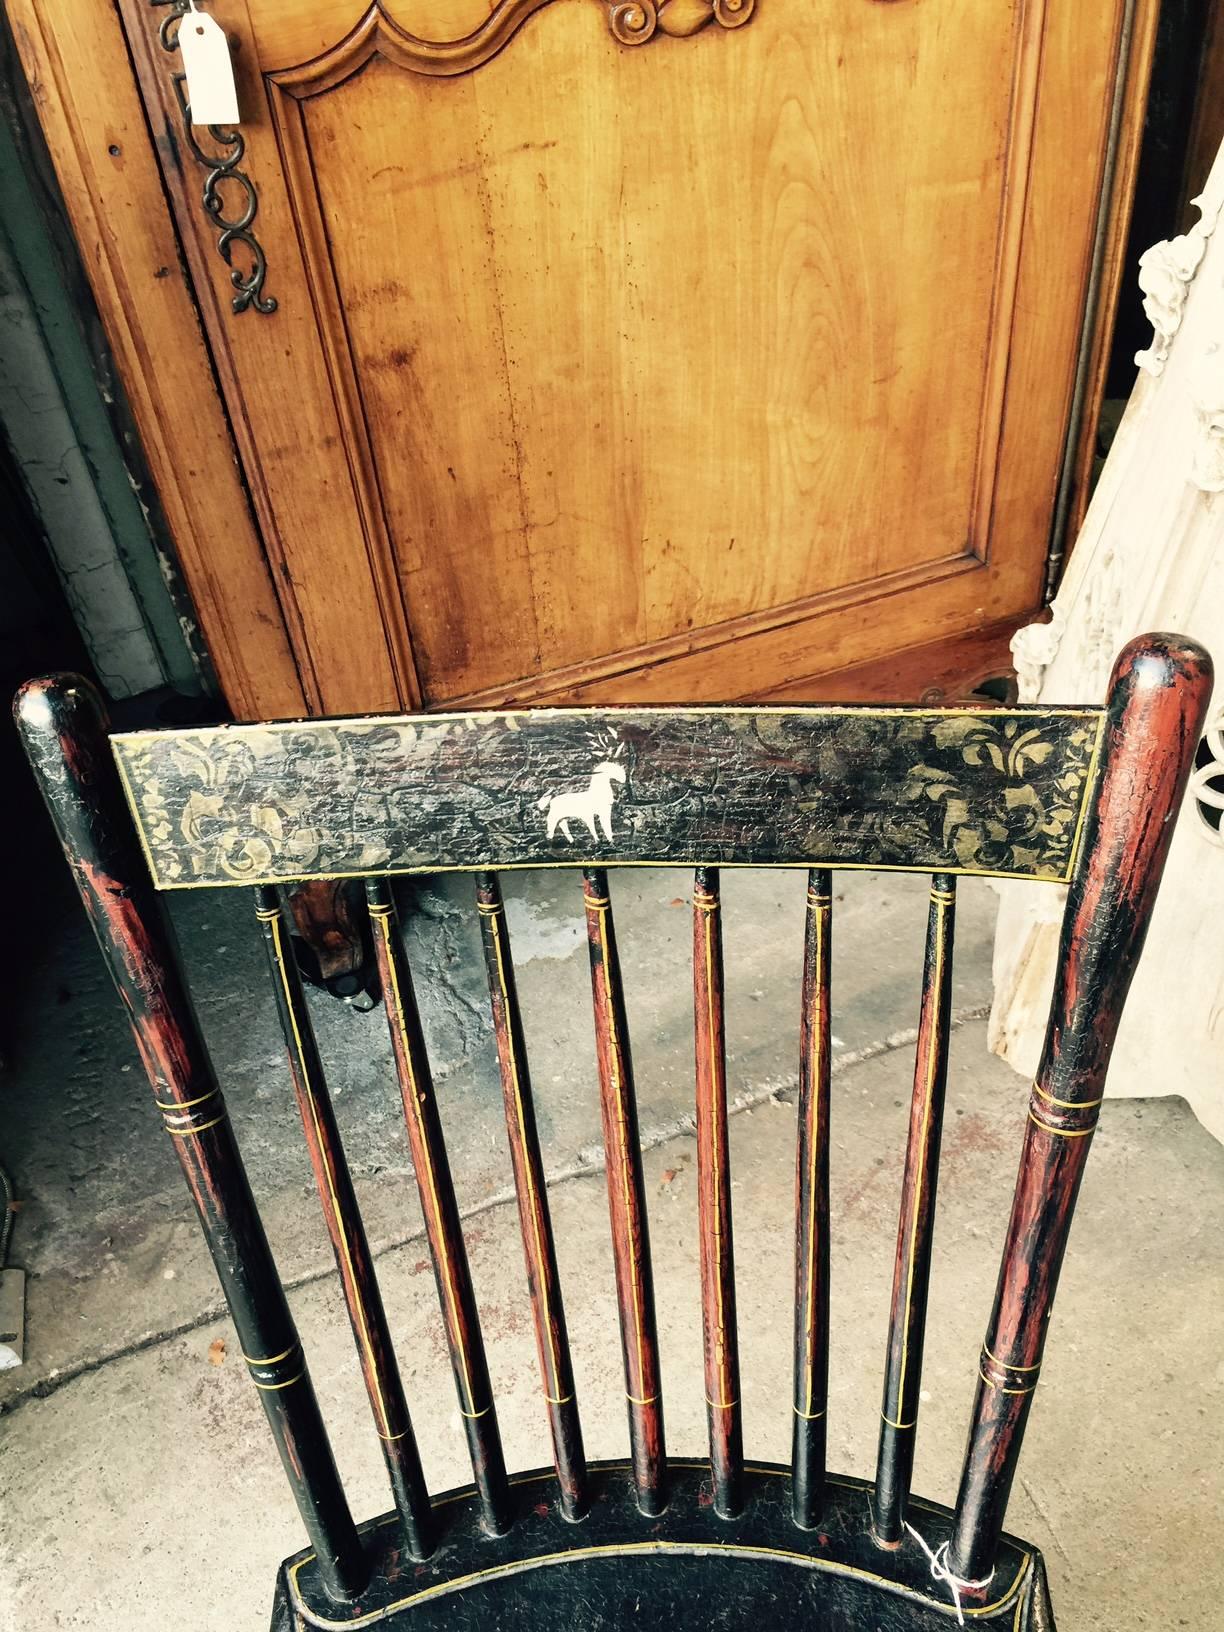 19th century Hitchcock chair with original paint.
Measures: Seat height 18''.